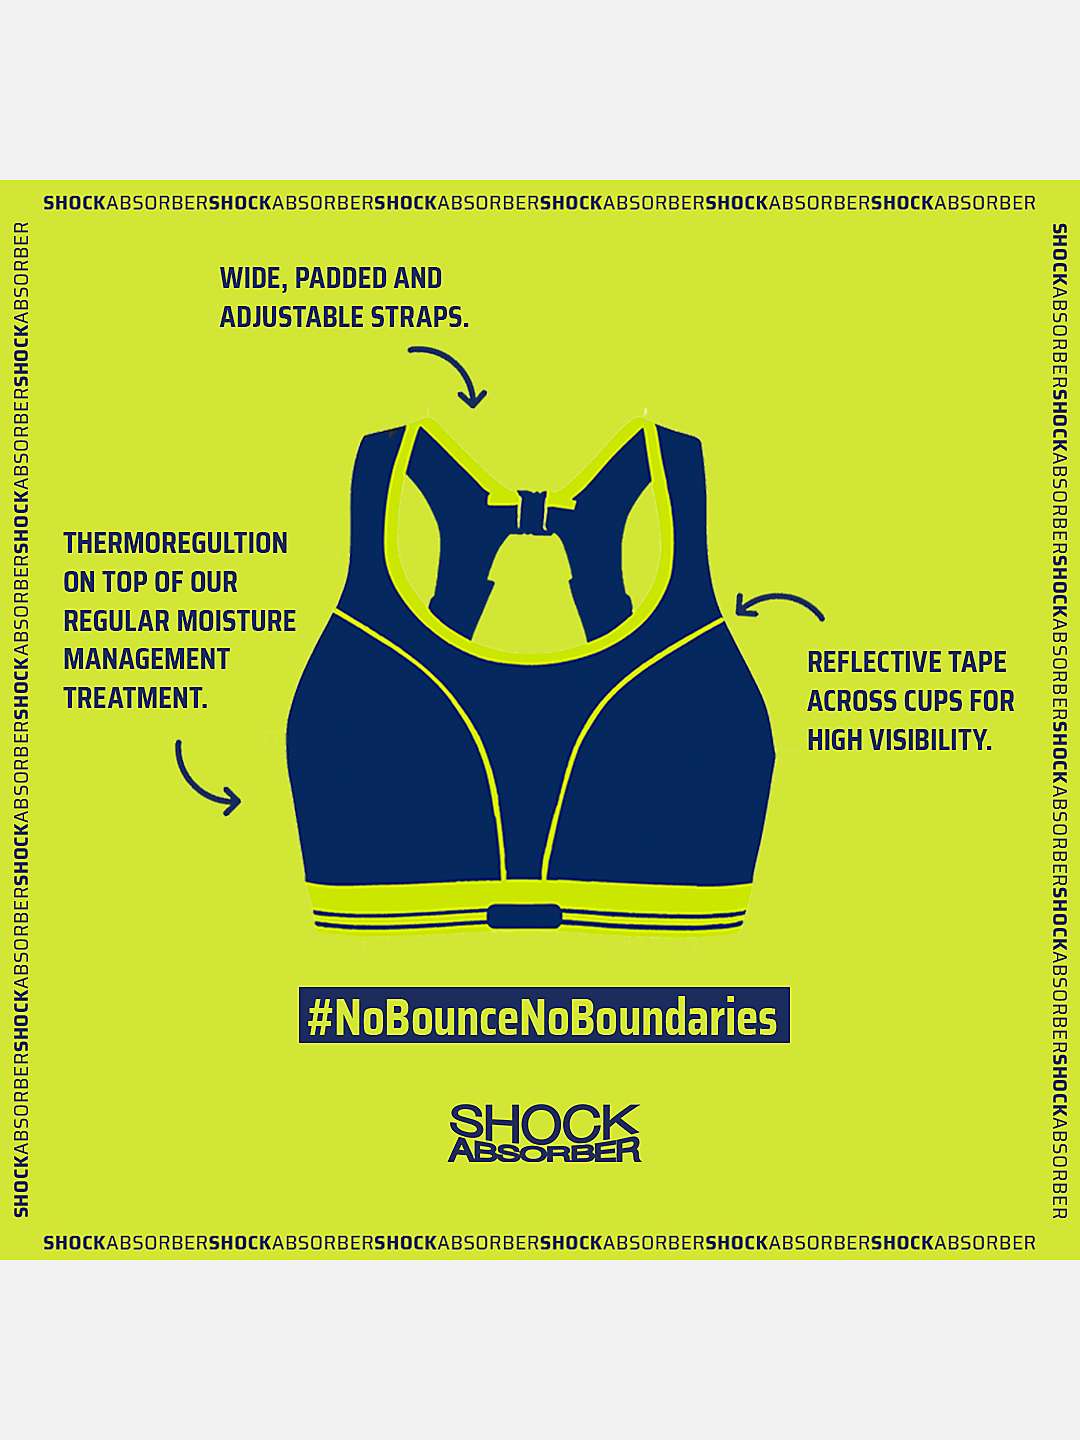 Buy Shock Absorber Ultimate Run Non-Wired Sports Bra Online at johnlewis.com